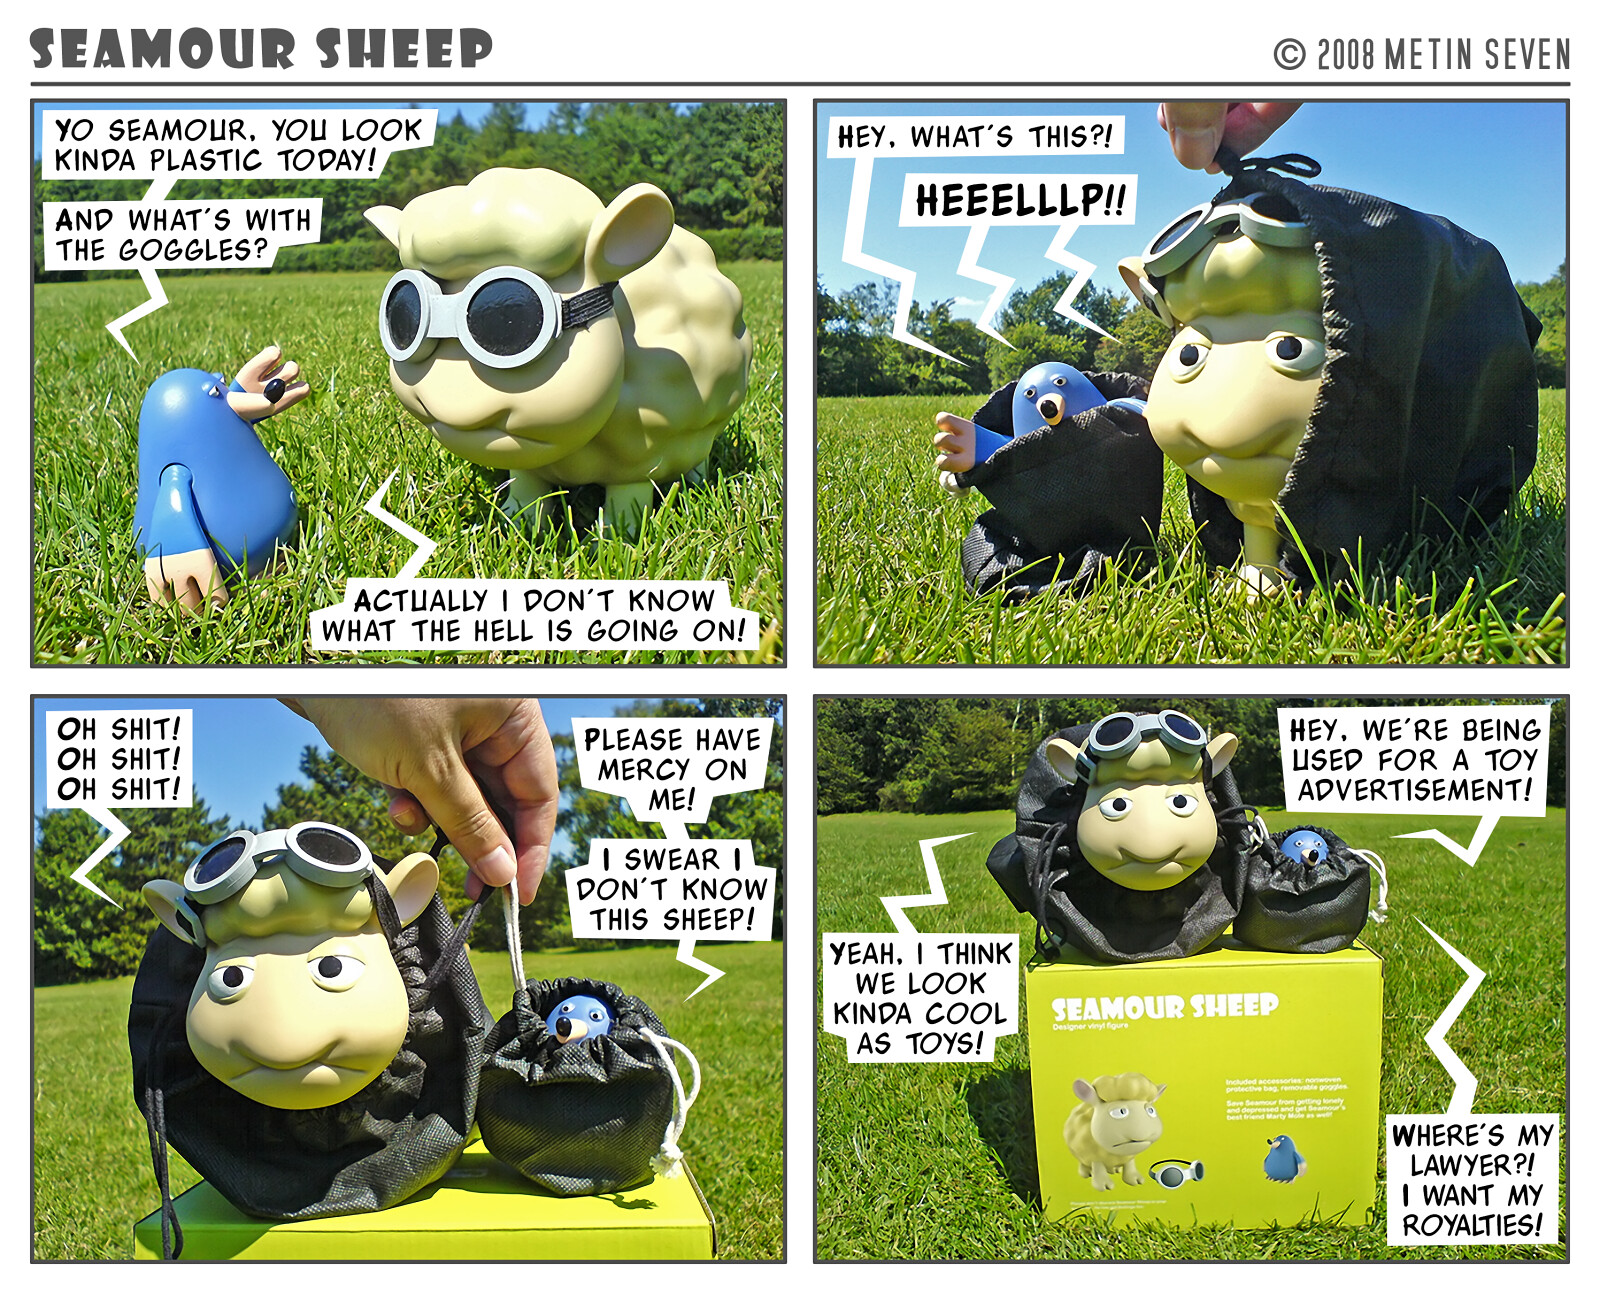 Seamour Sheep and Marty Mole comic strip episode: Toy story 2